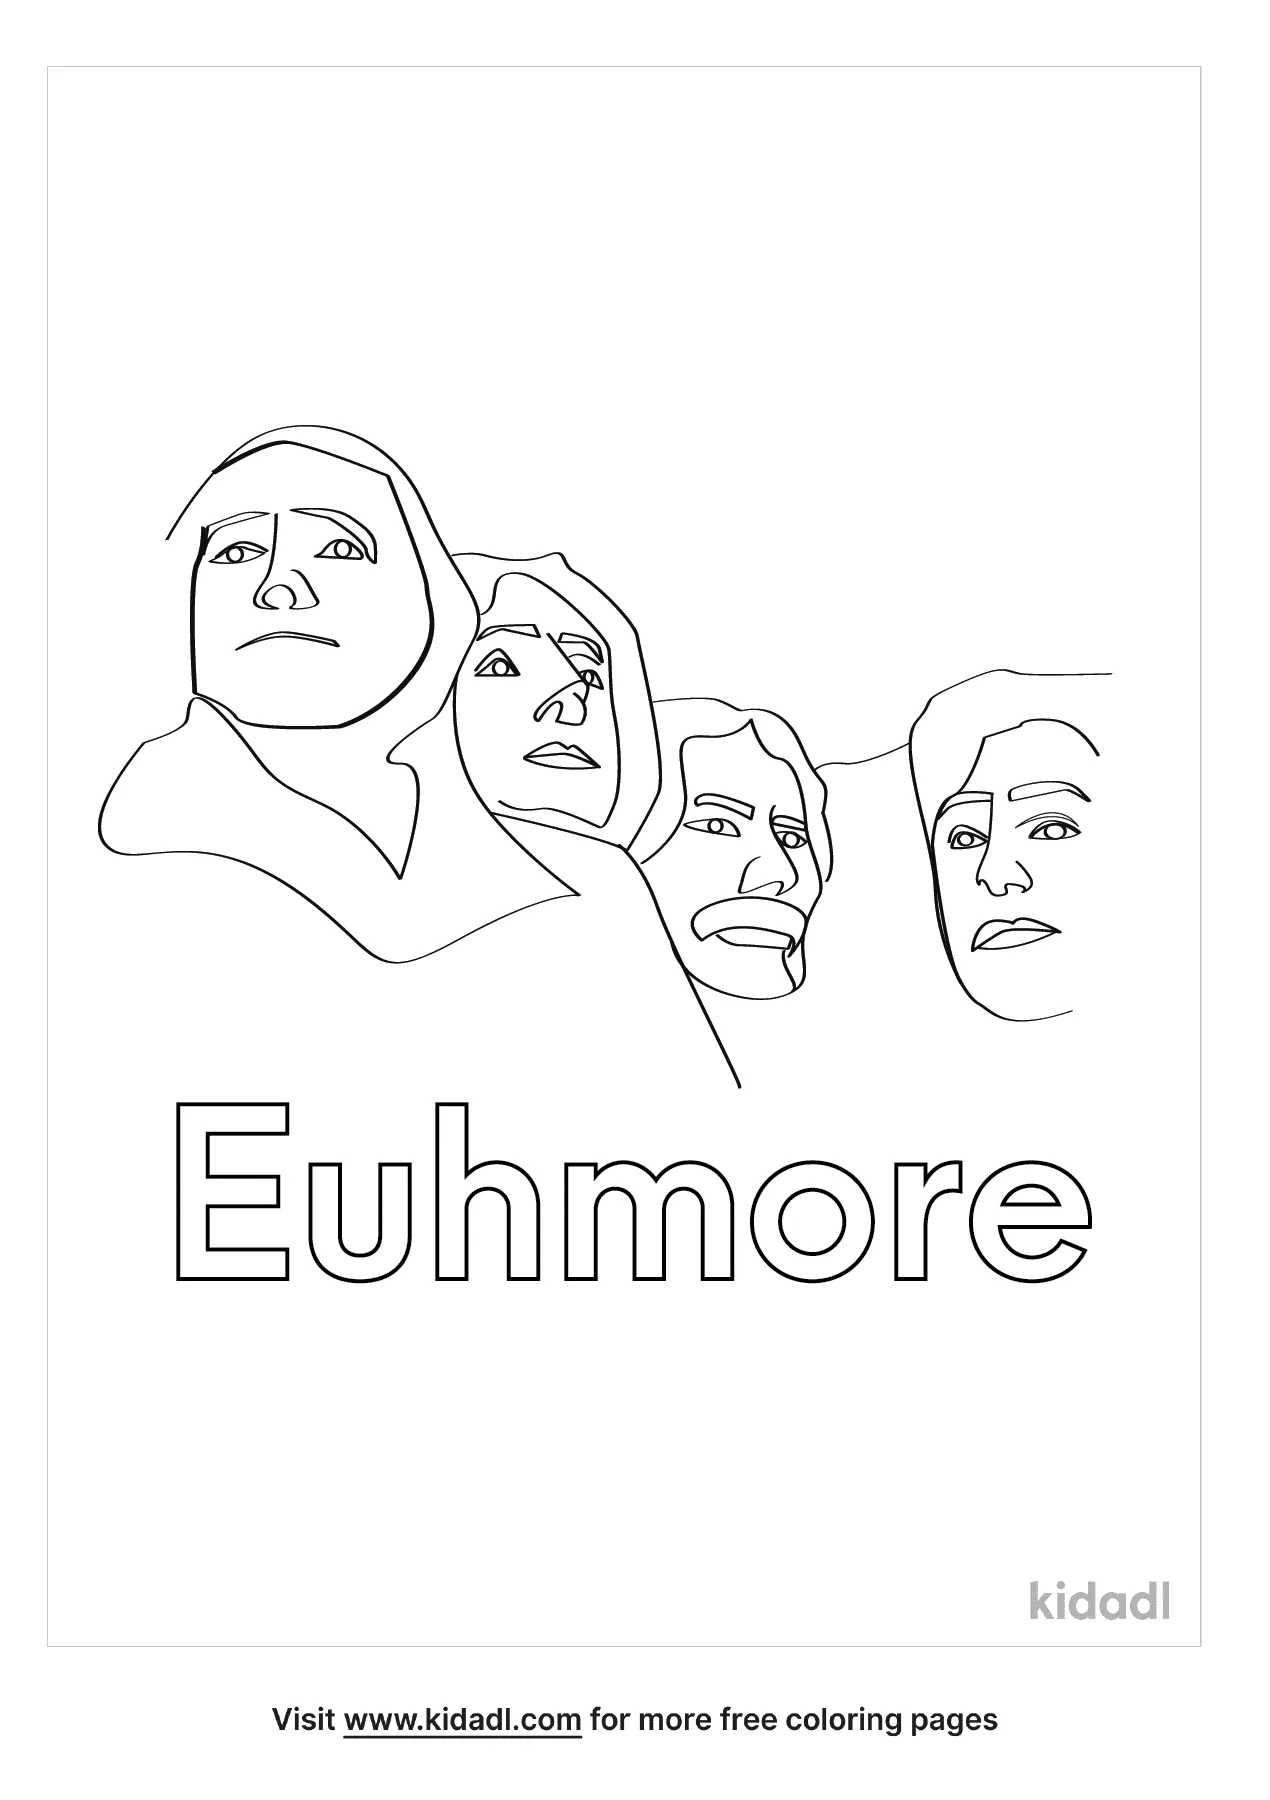 Euhmore Coloring Page